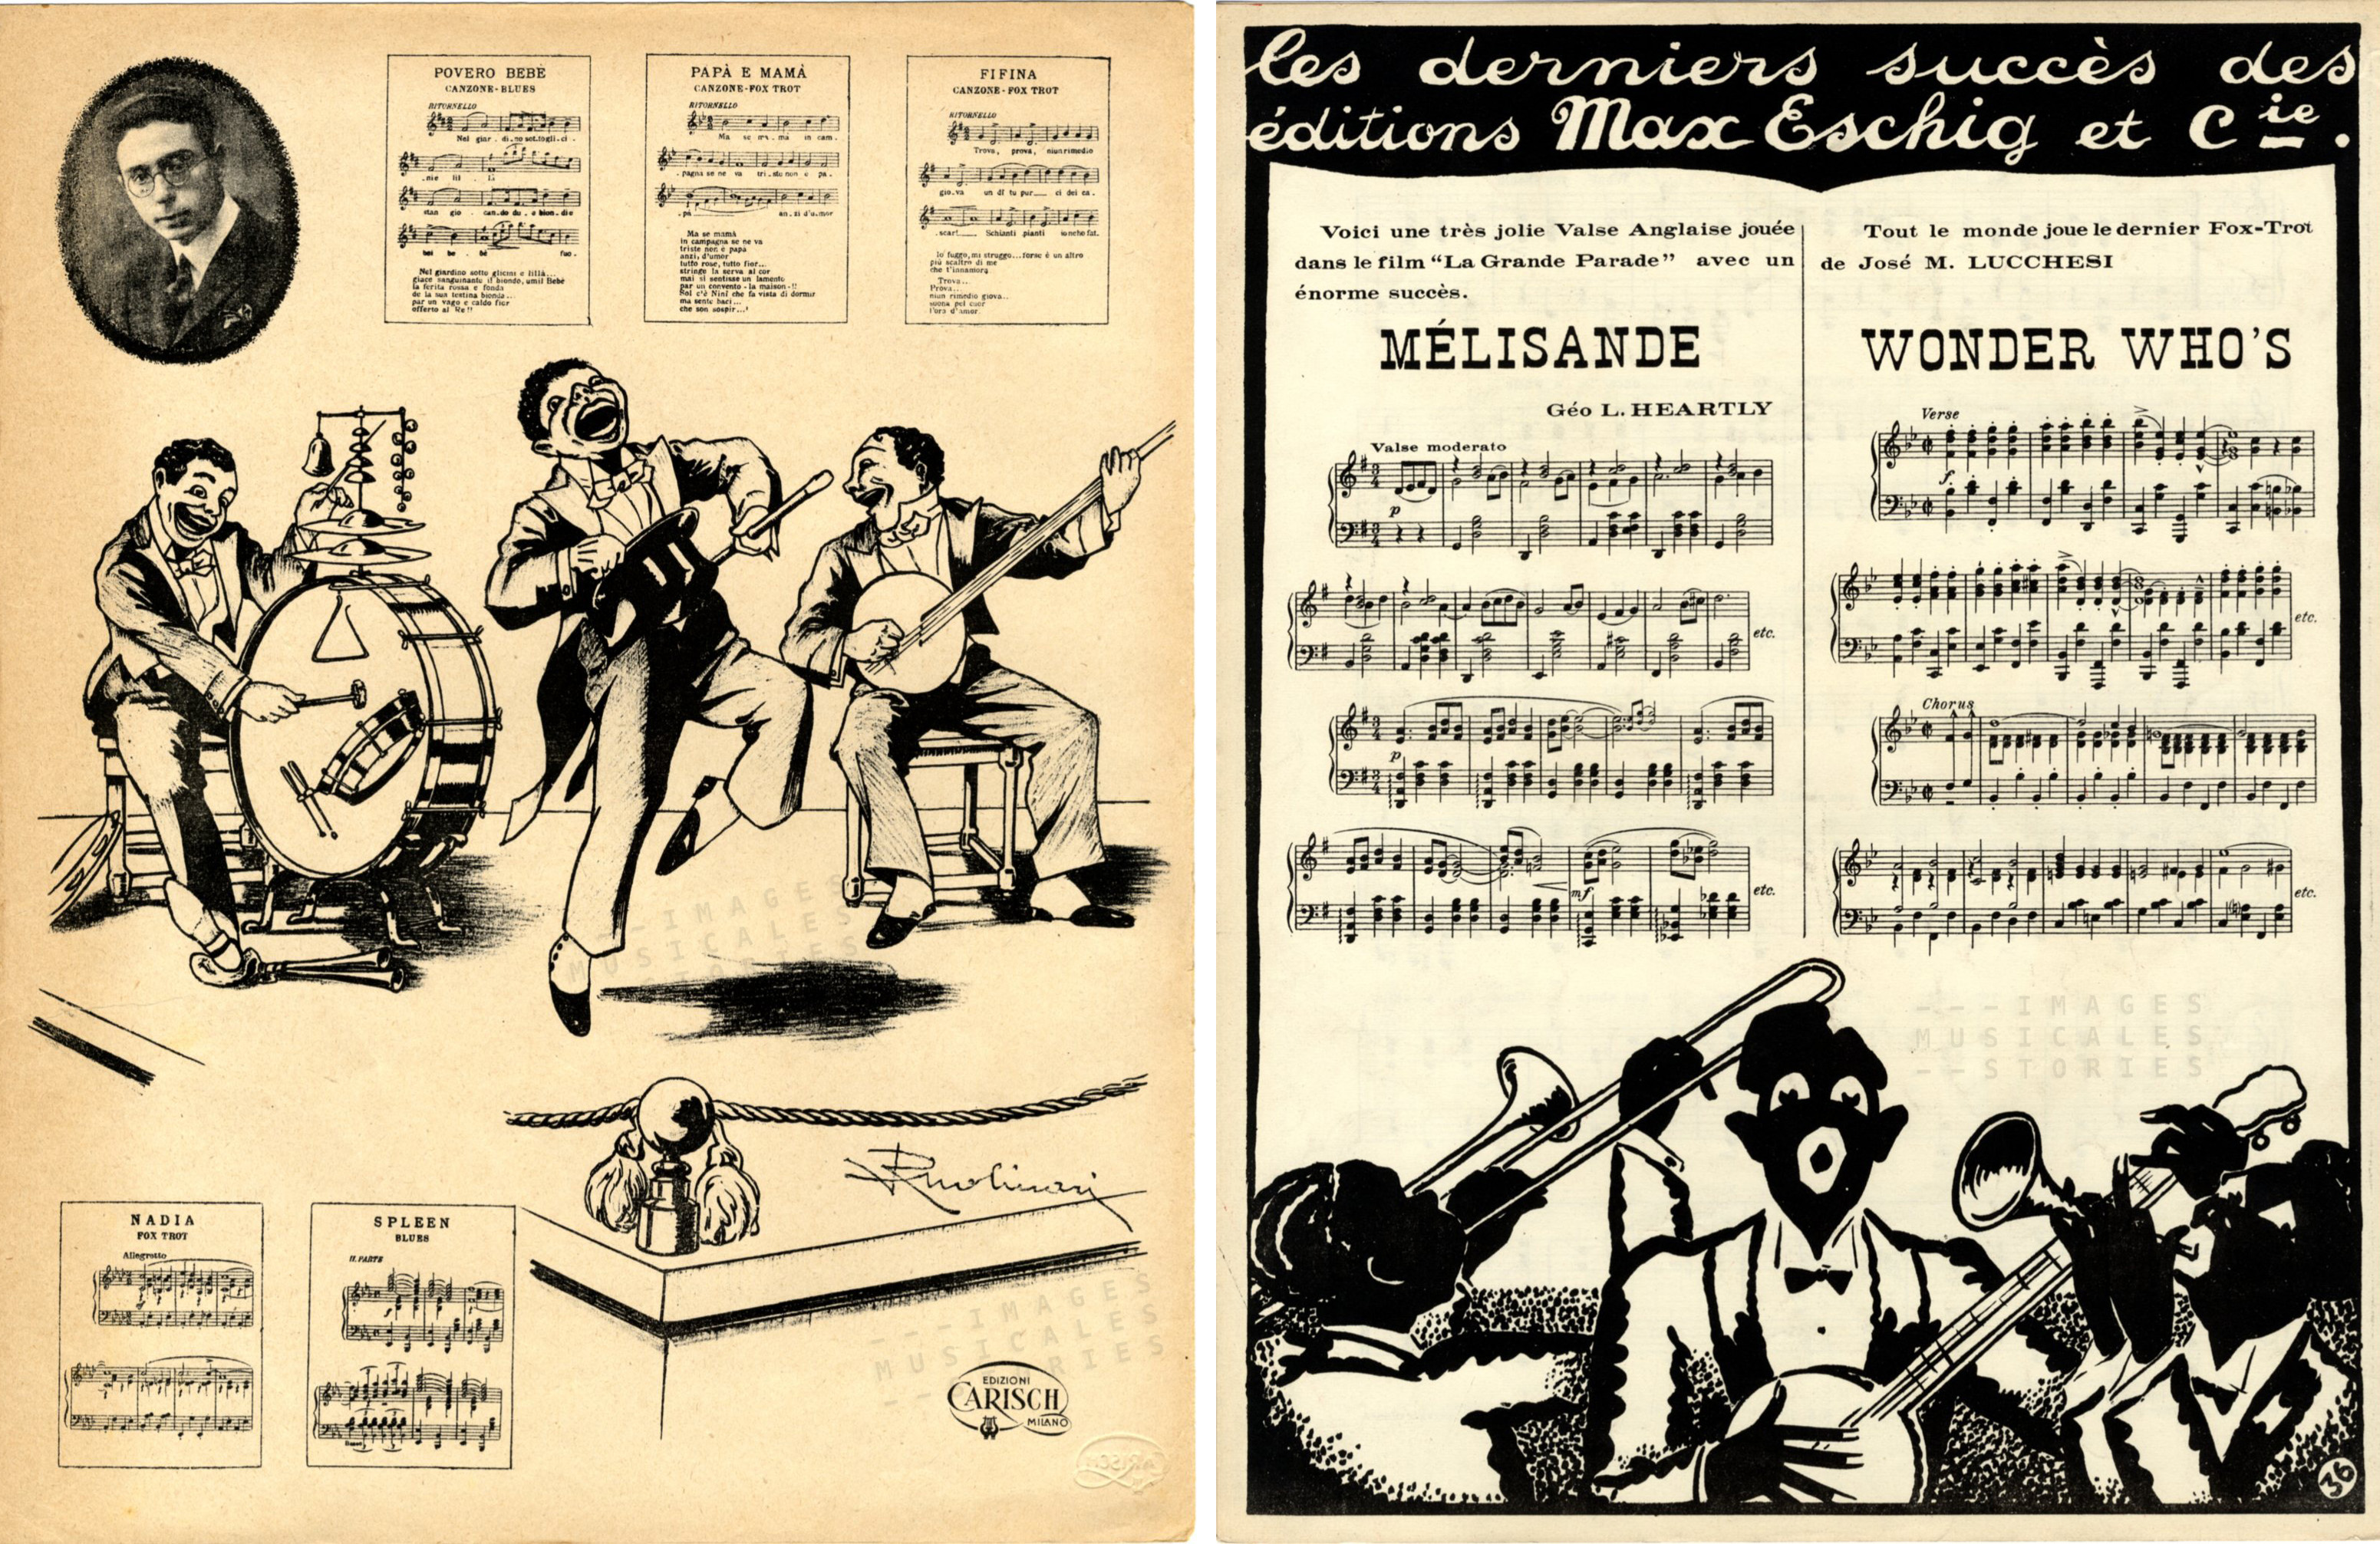 Also the Italian publisher Carisch & C. and the French Max Eschig used to promote their offer of sheet music on the back cover. On the left a lively jazzband drawn by Ruolinari (s.d.), on the right another jazzband with stereotyped black musicians (illustrator and date unknown). 